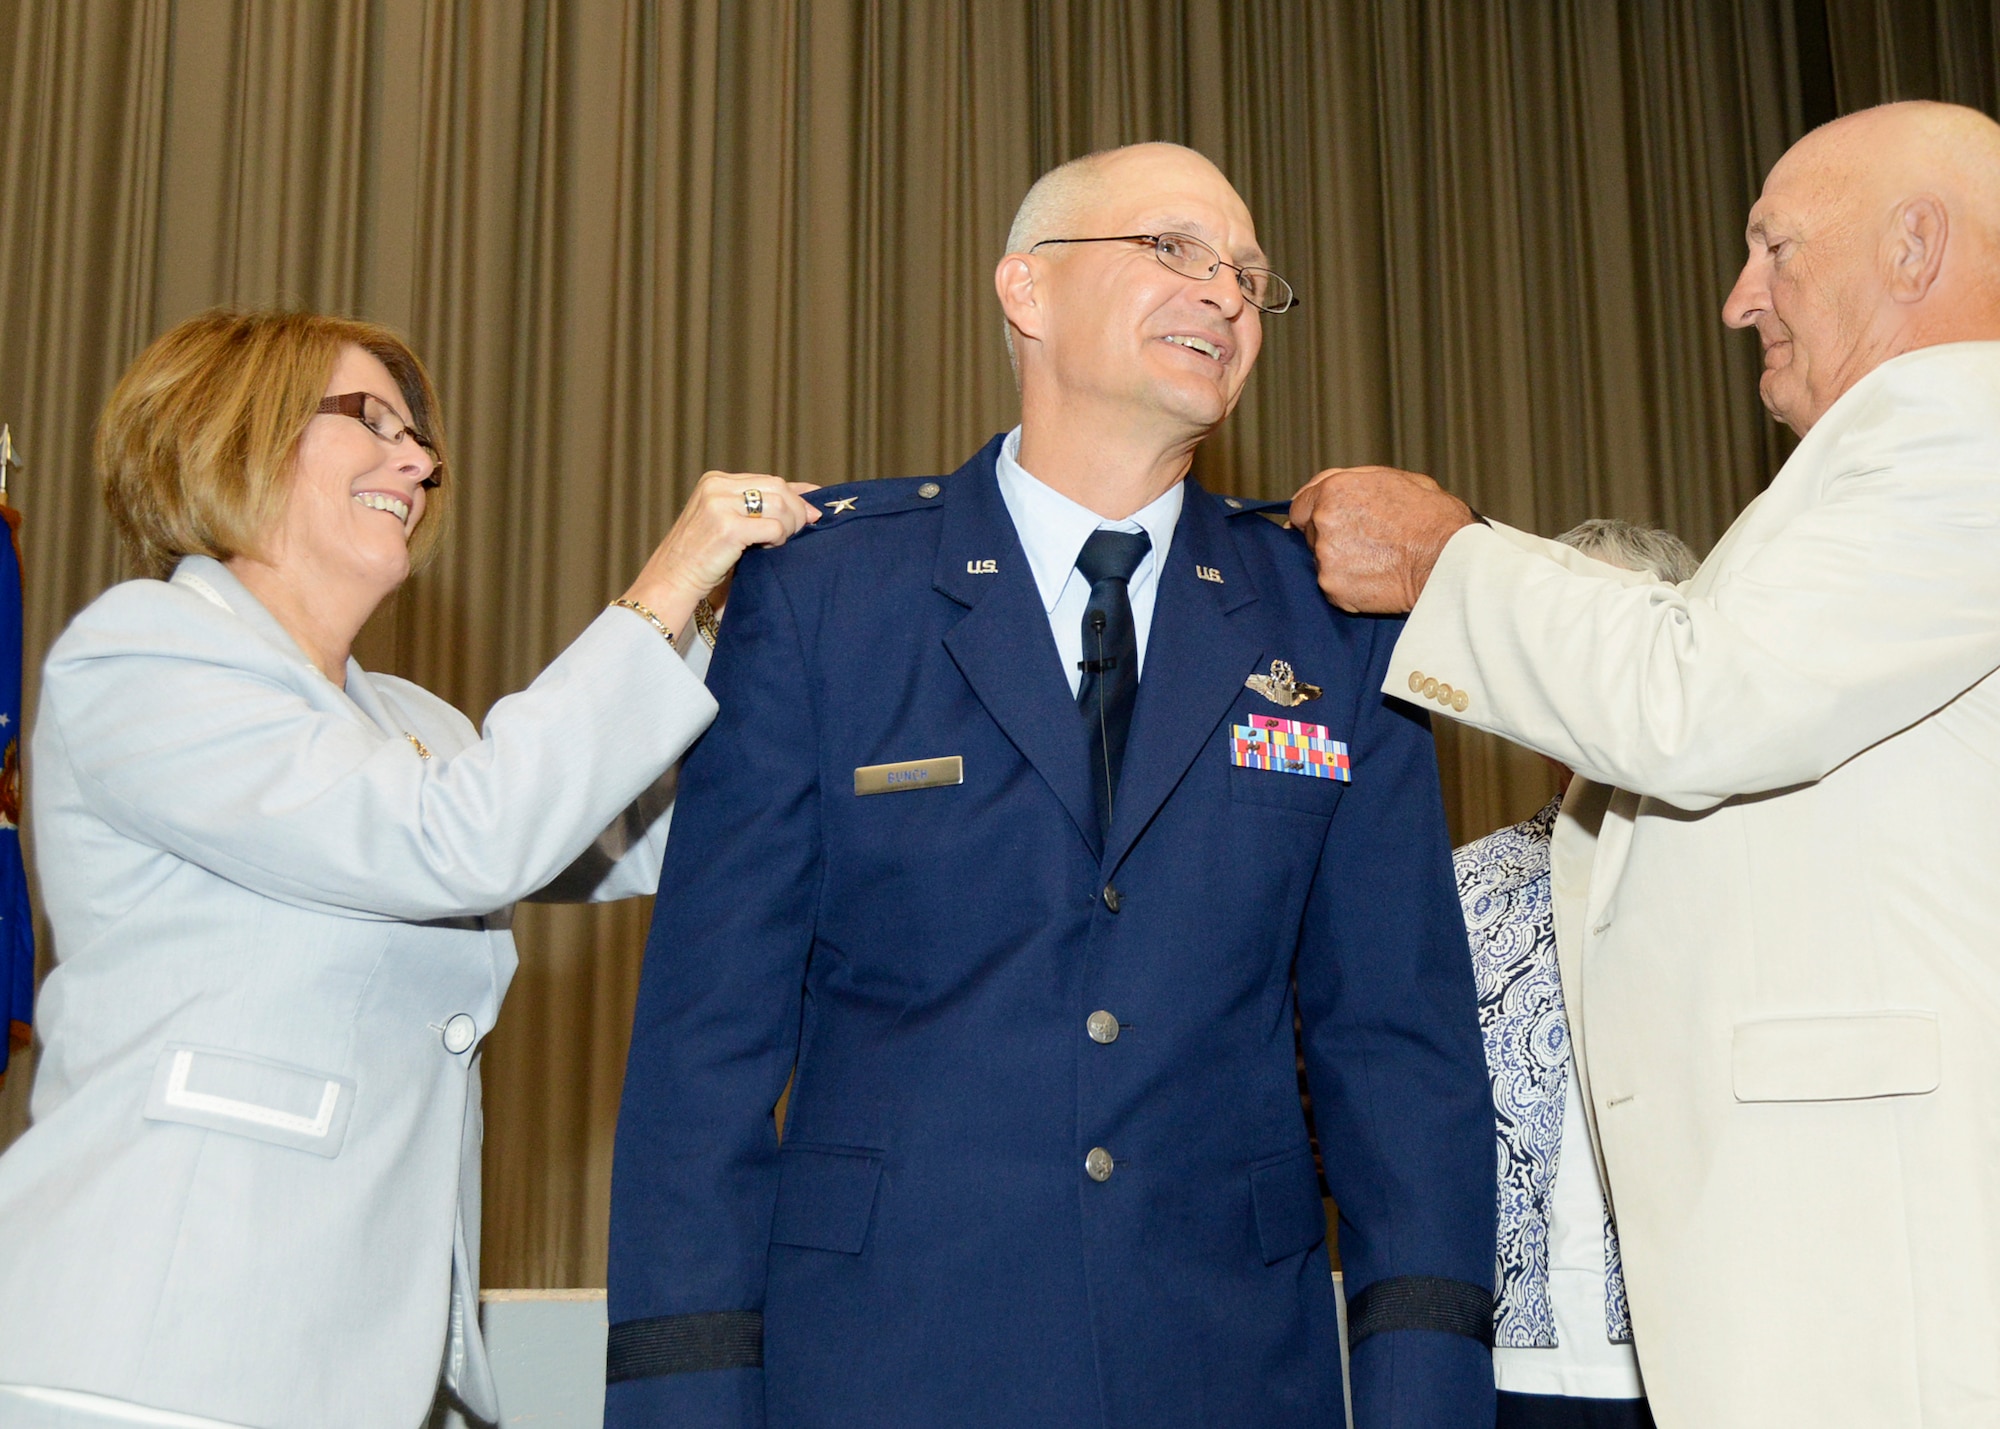 AFTC CC formally promoted to major general > Edwards Air Force Base > News